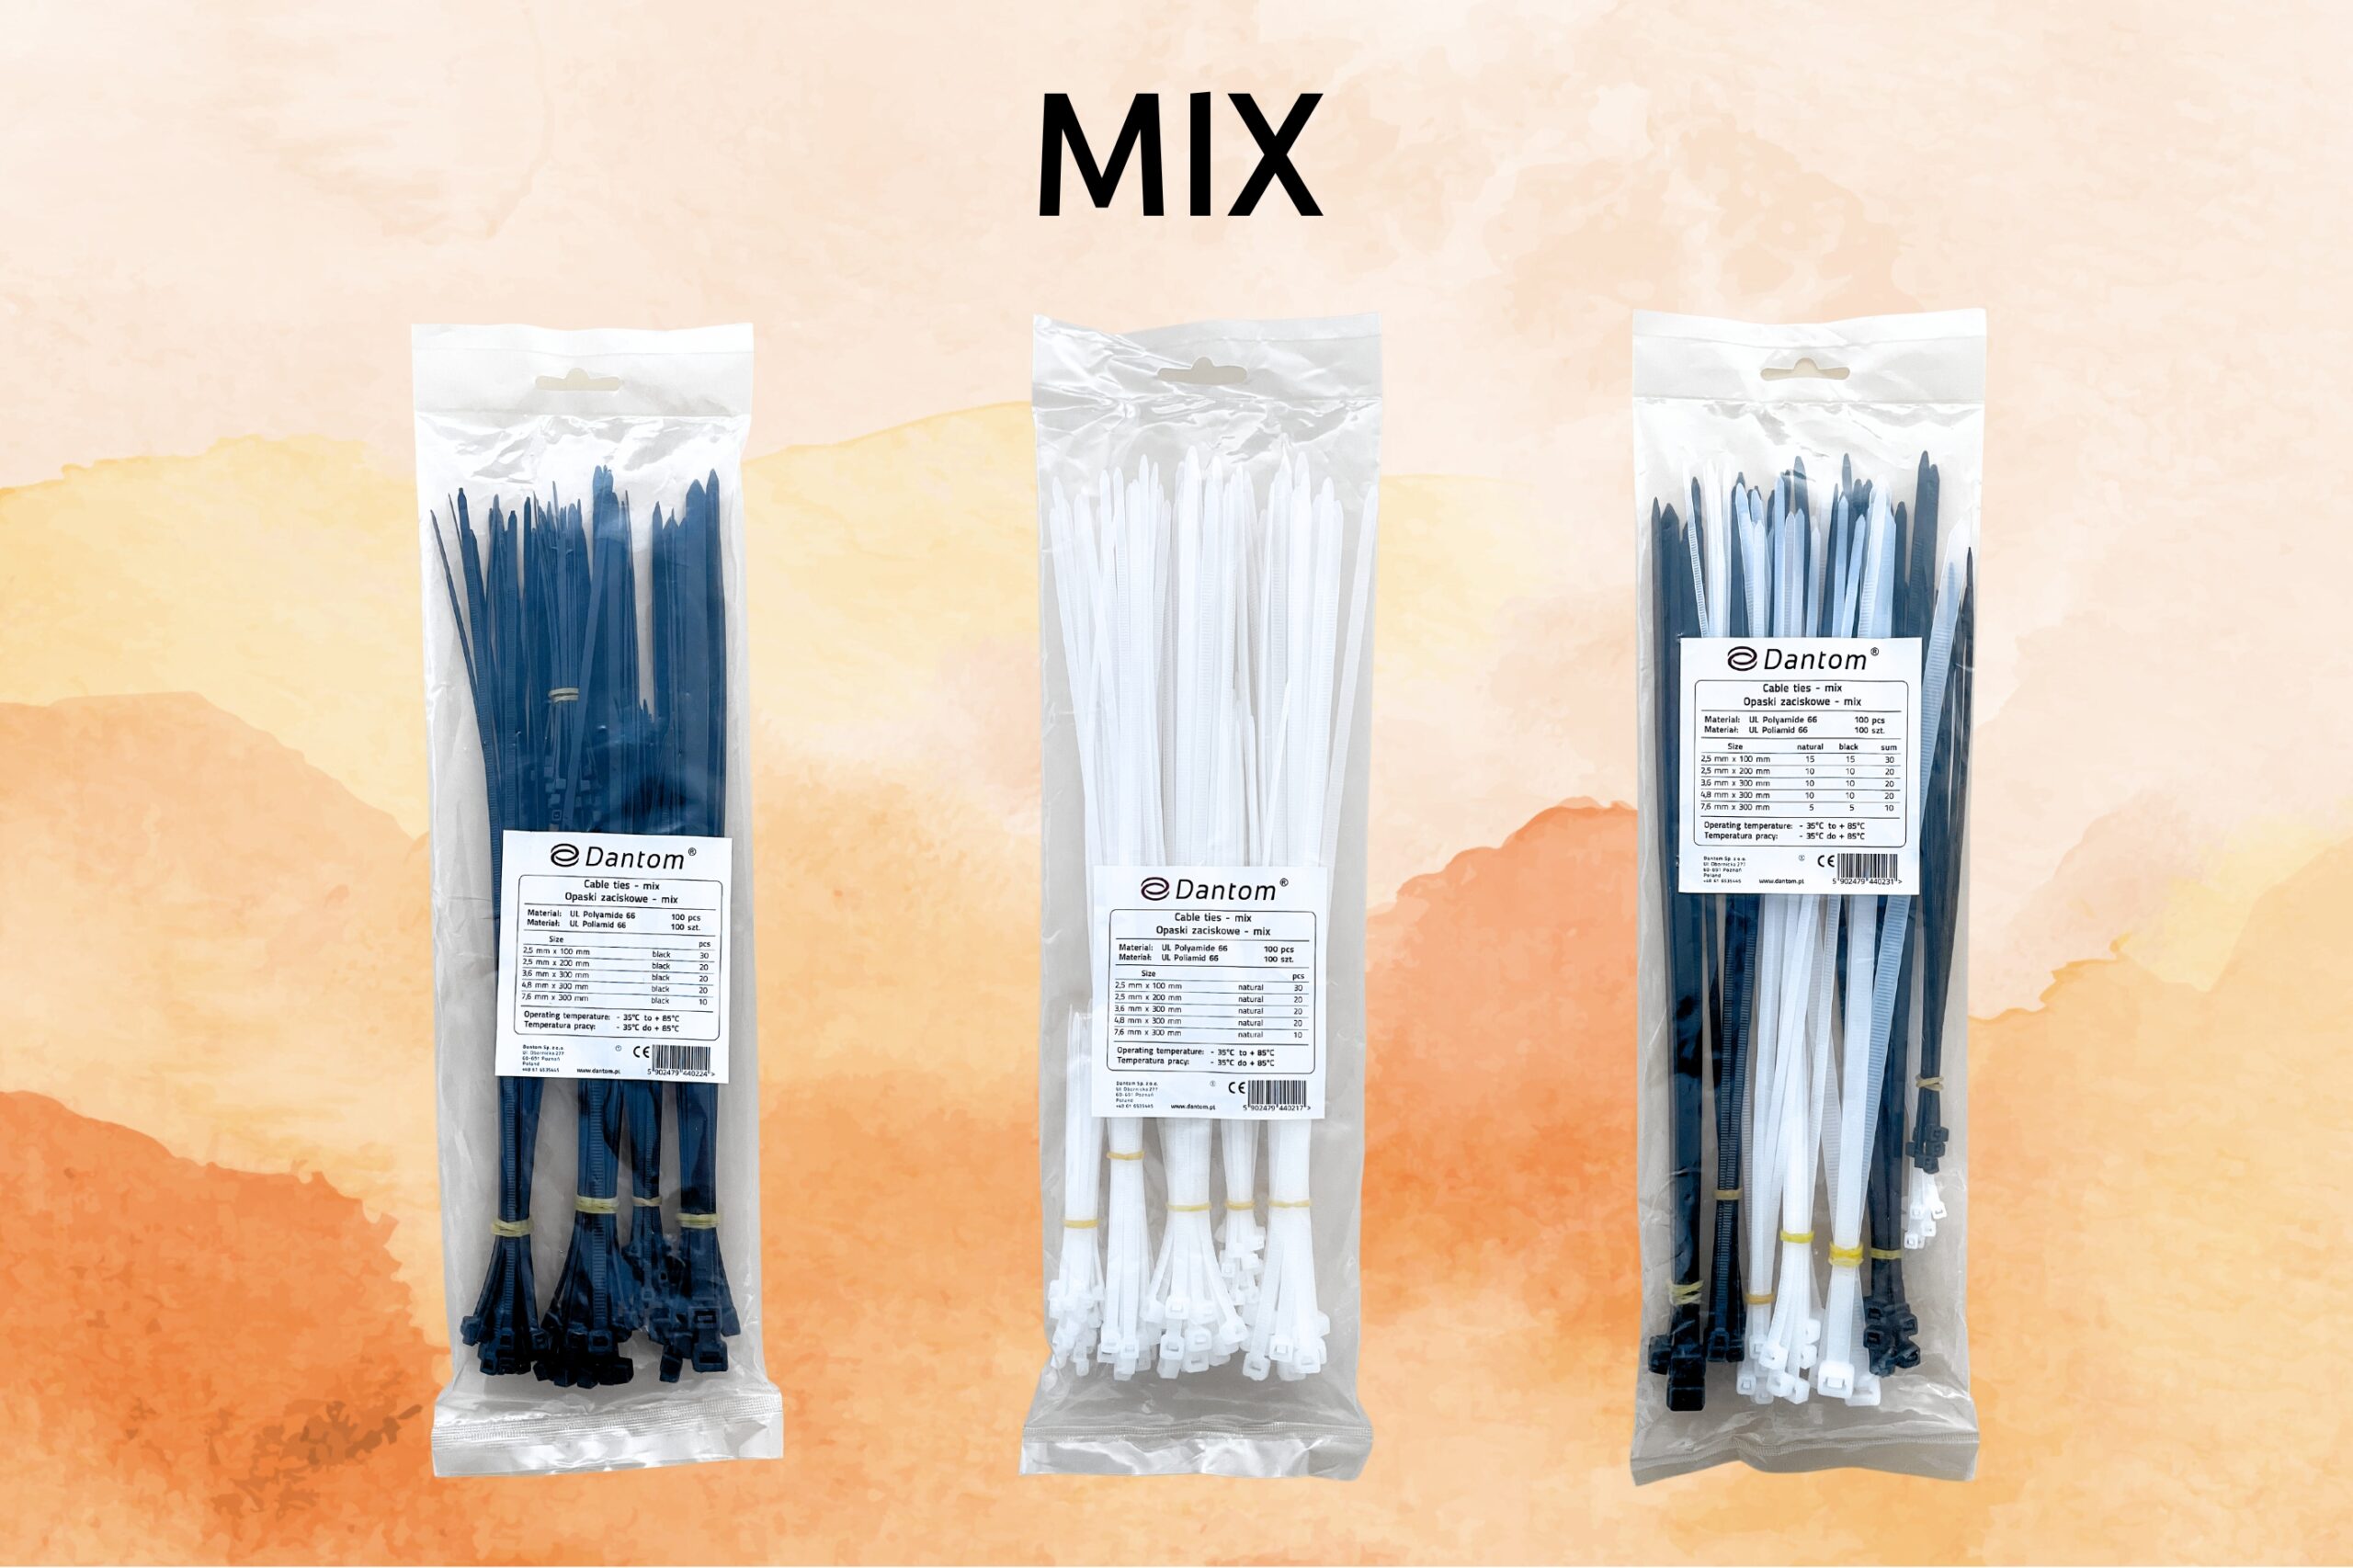 Mixed cable ties